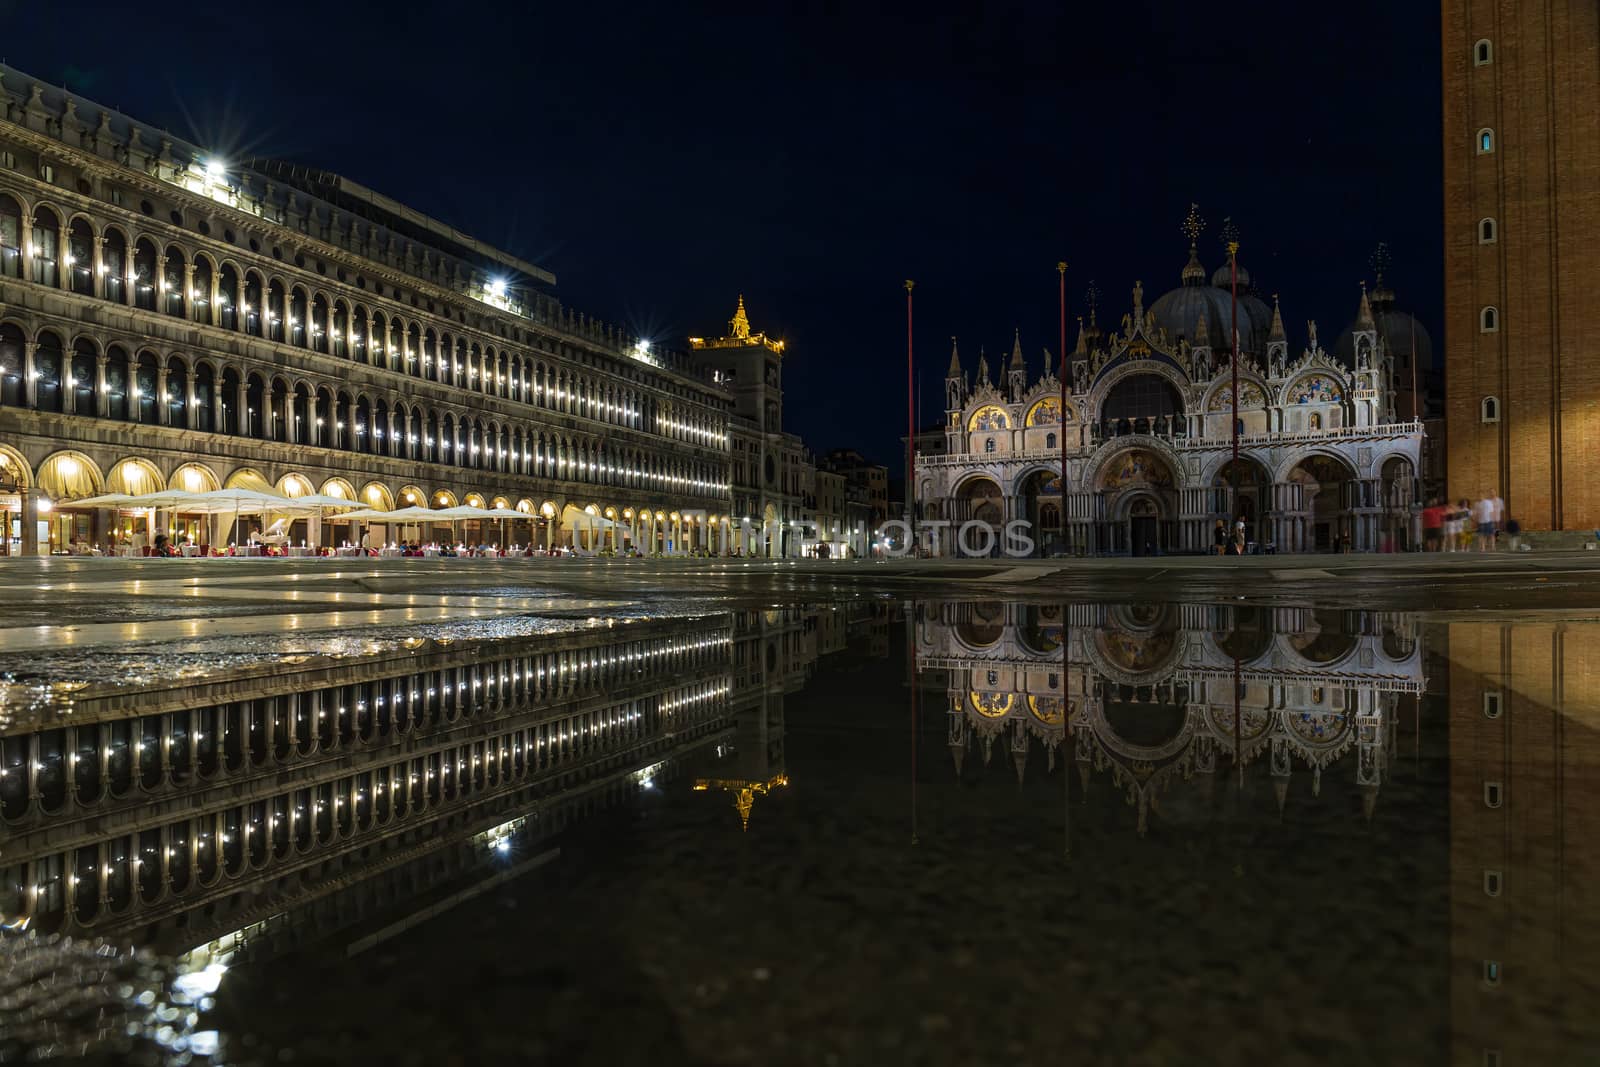 Piazza San Marco at night with reflection of the Basilica